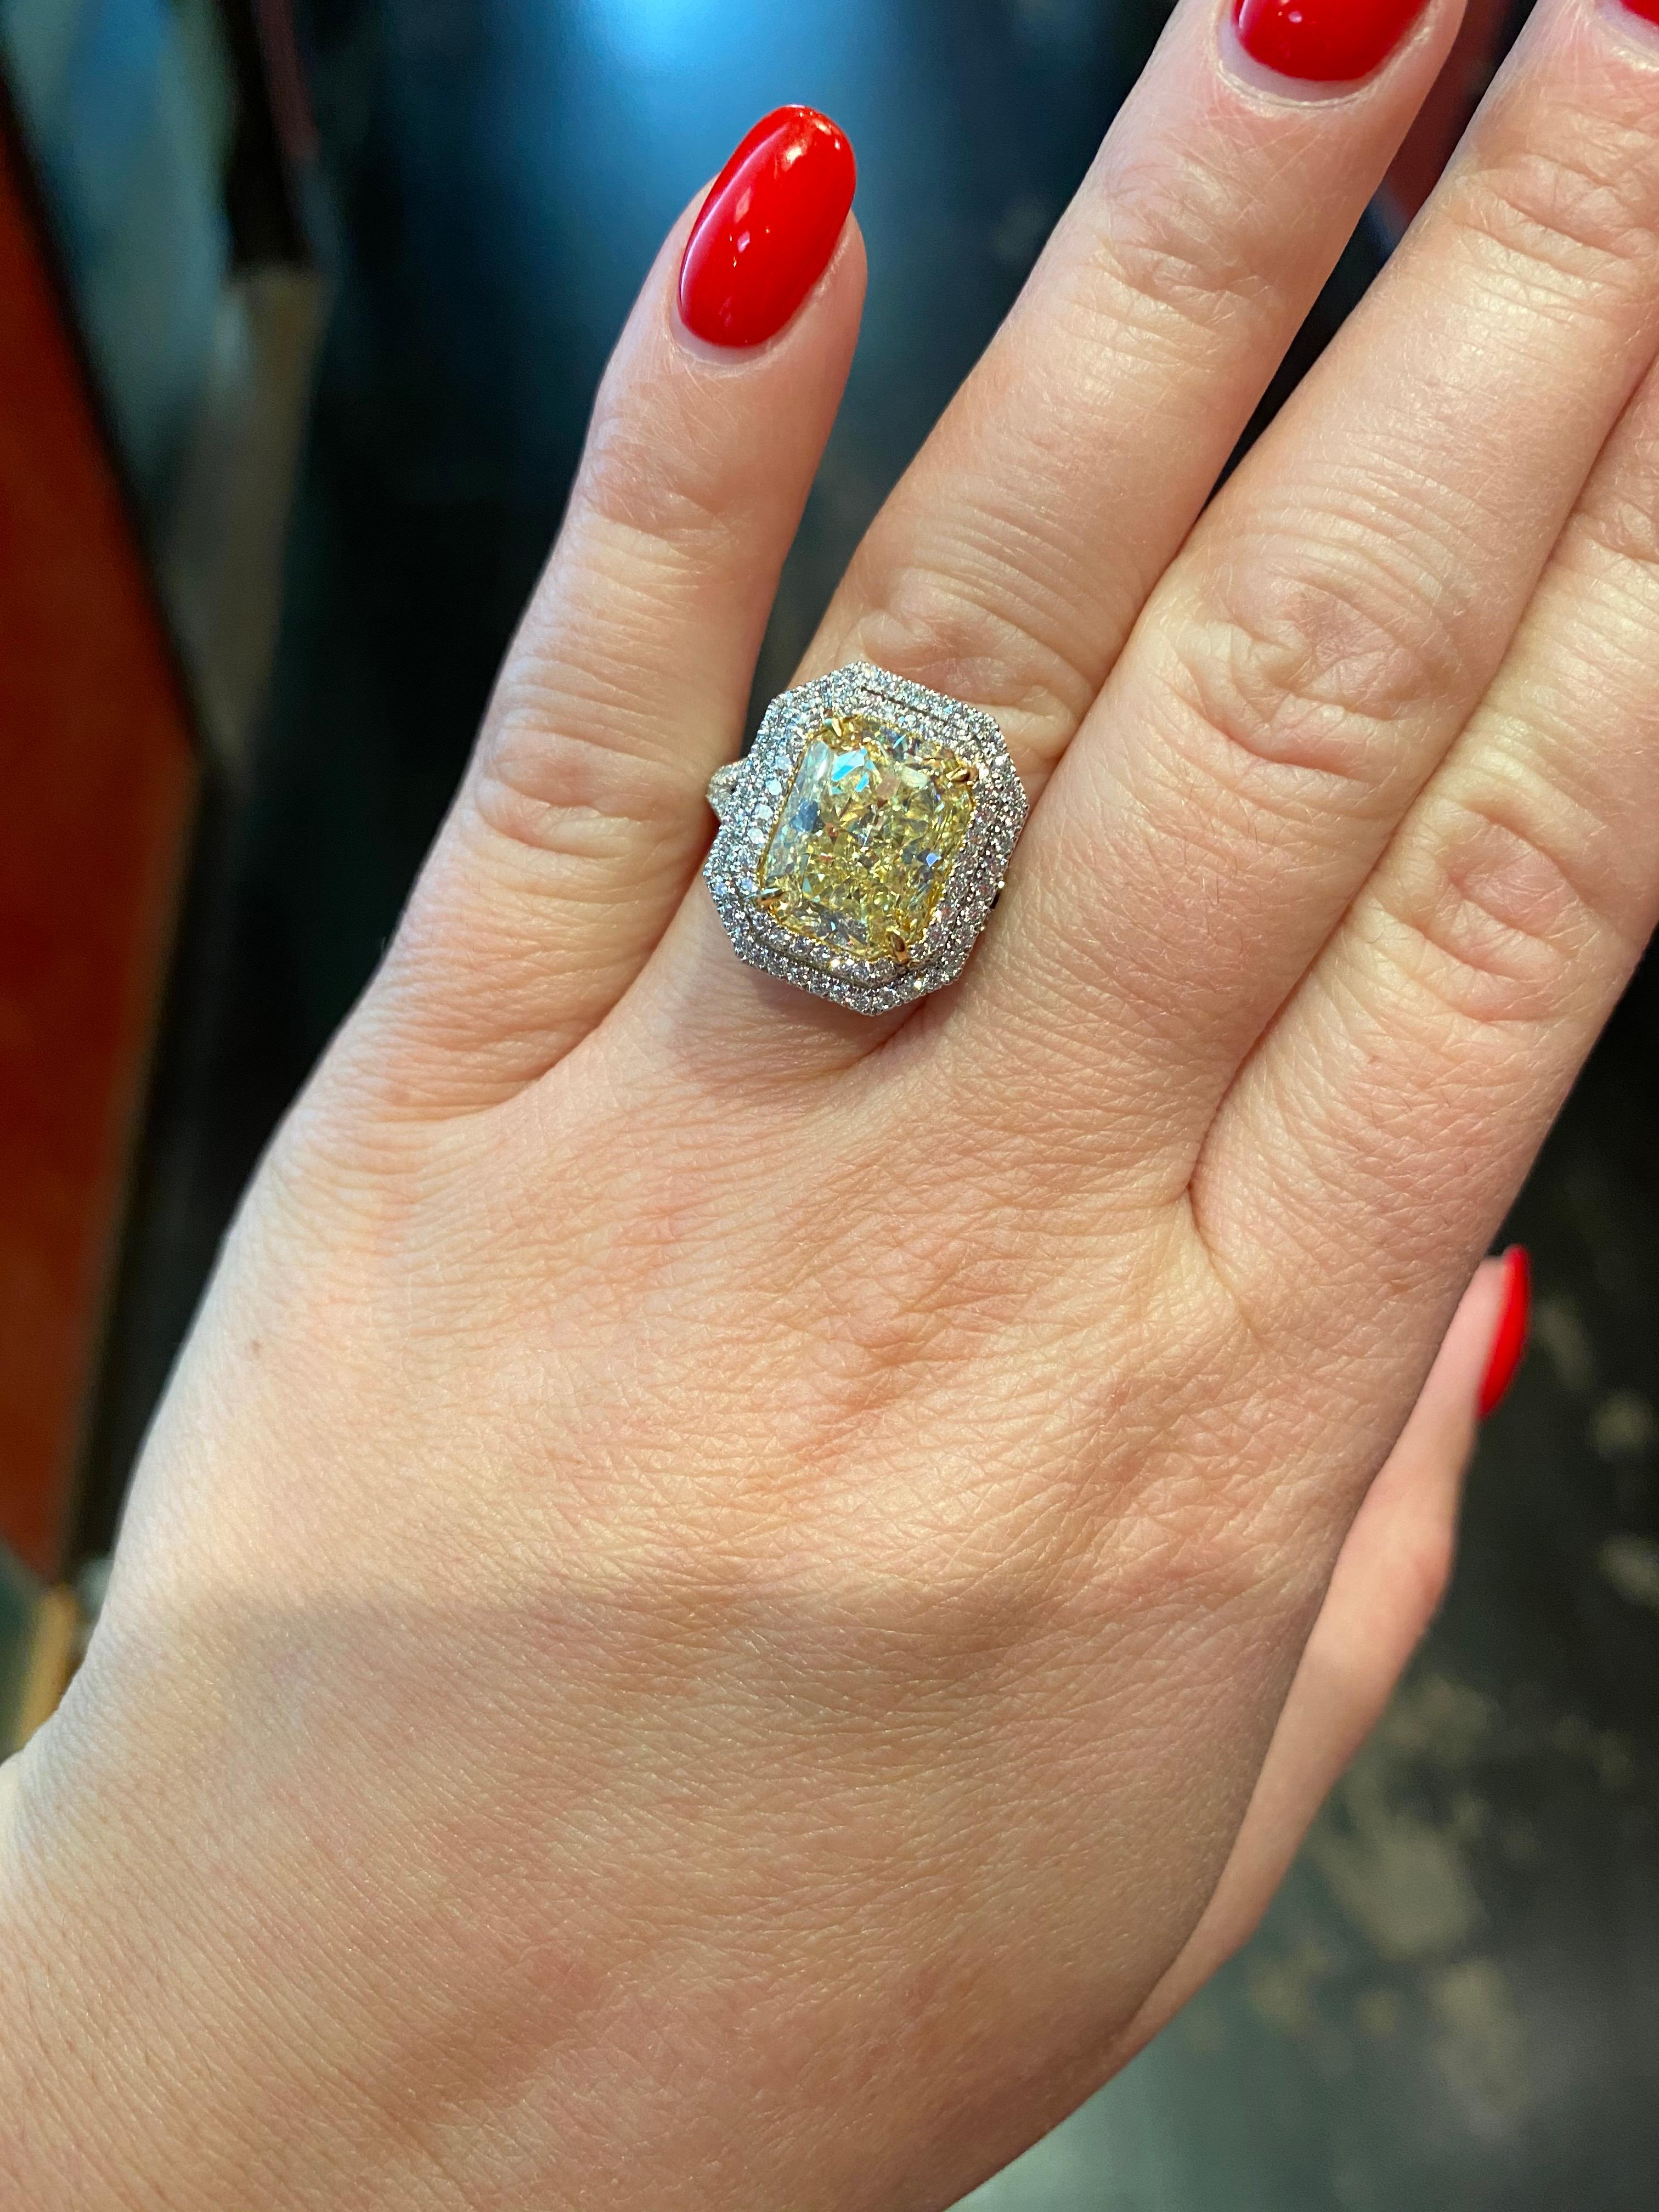 Platinum & 18K Yellow Gold Micro- Pave Ring with round brilliant cut diamonds weighing in total 1.20 carats. Center Diamond is GIA certified Radiant cut weighting 5.17 carats Fancy Yellow VS2.

Viewings available in our NYC wholesale office by